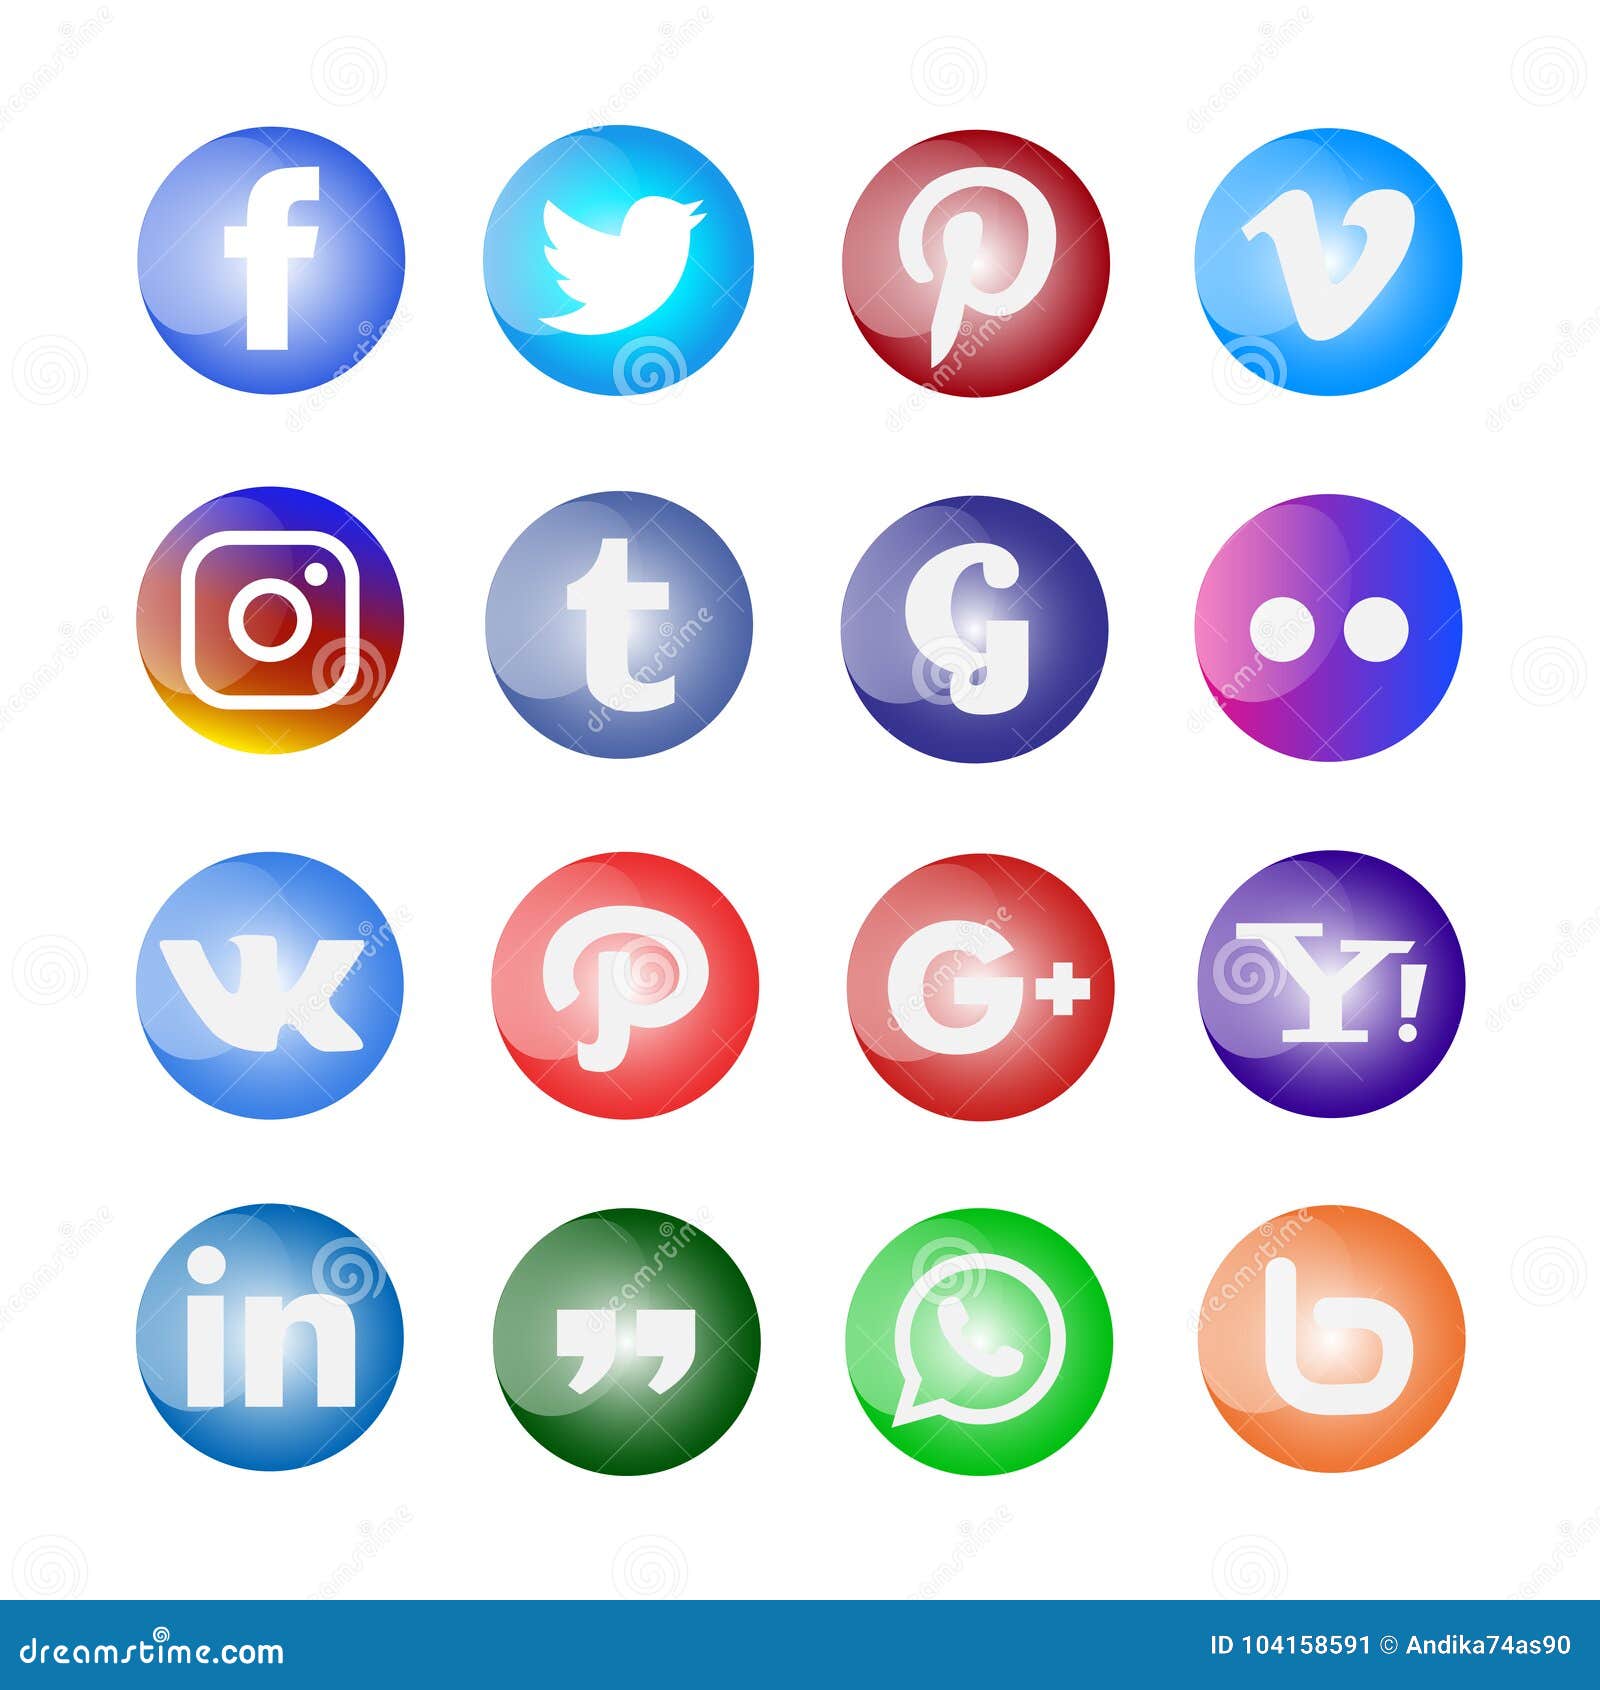 Glossy Social Media Icon And Buttons Set Editorial Photo Illustration